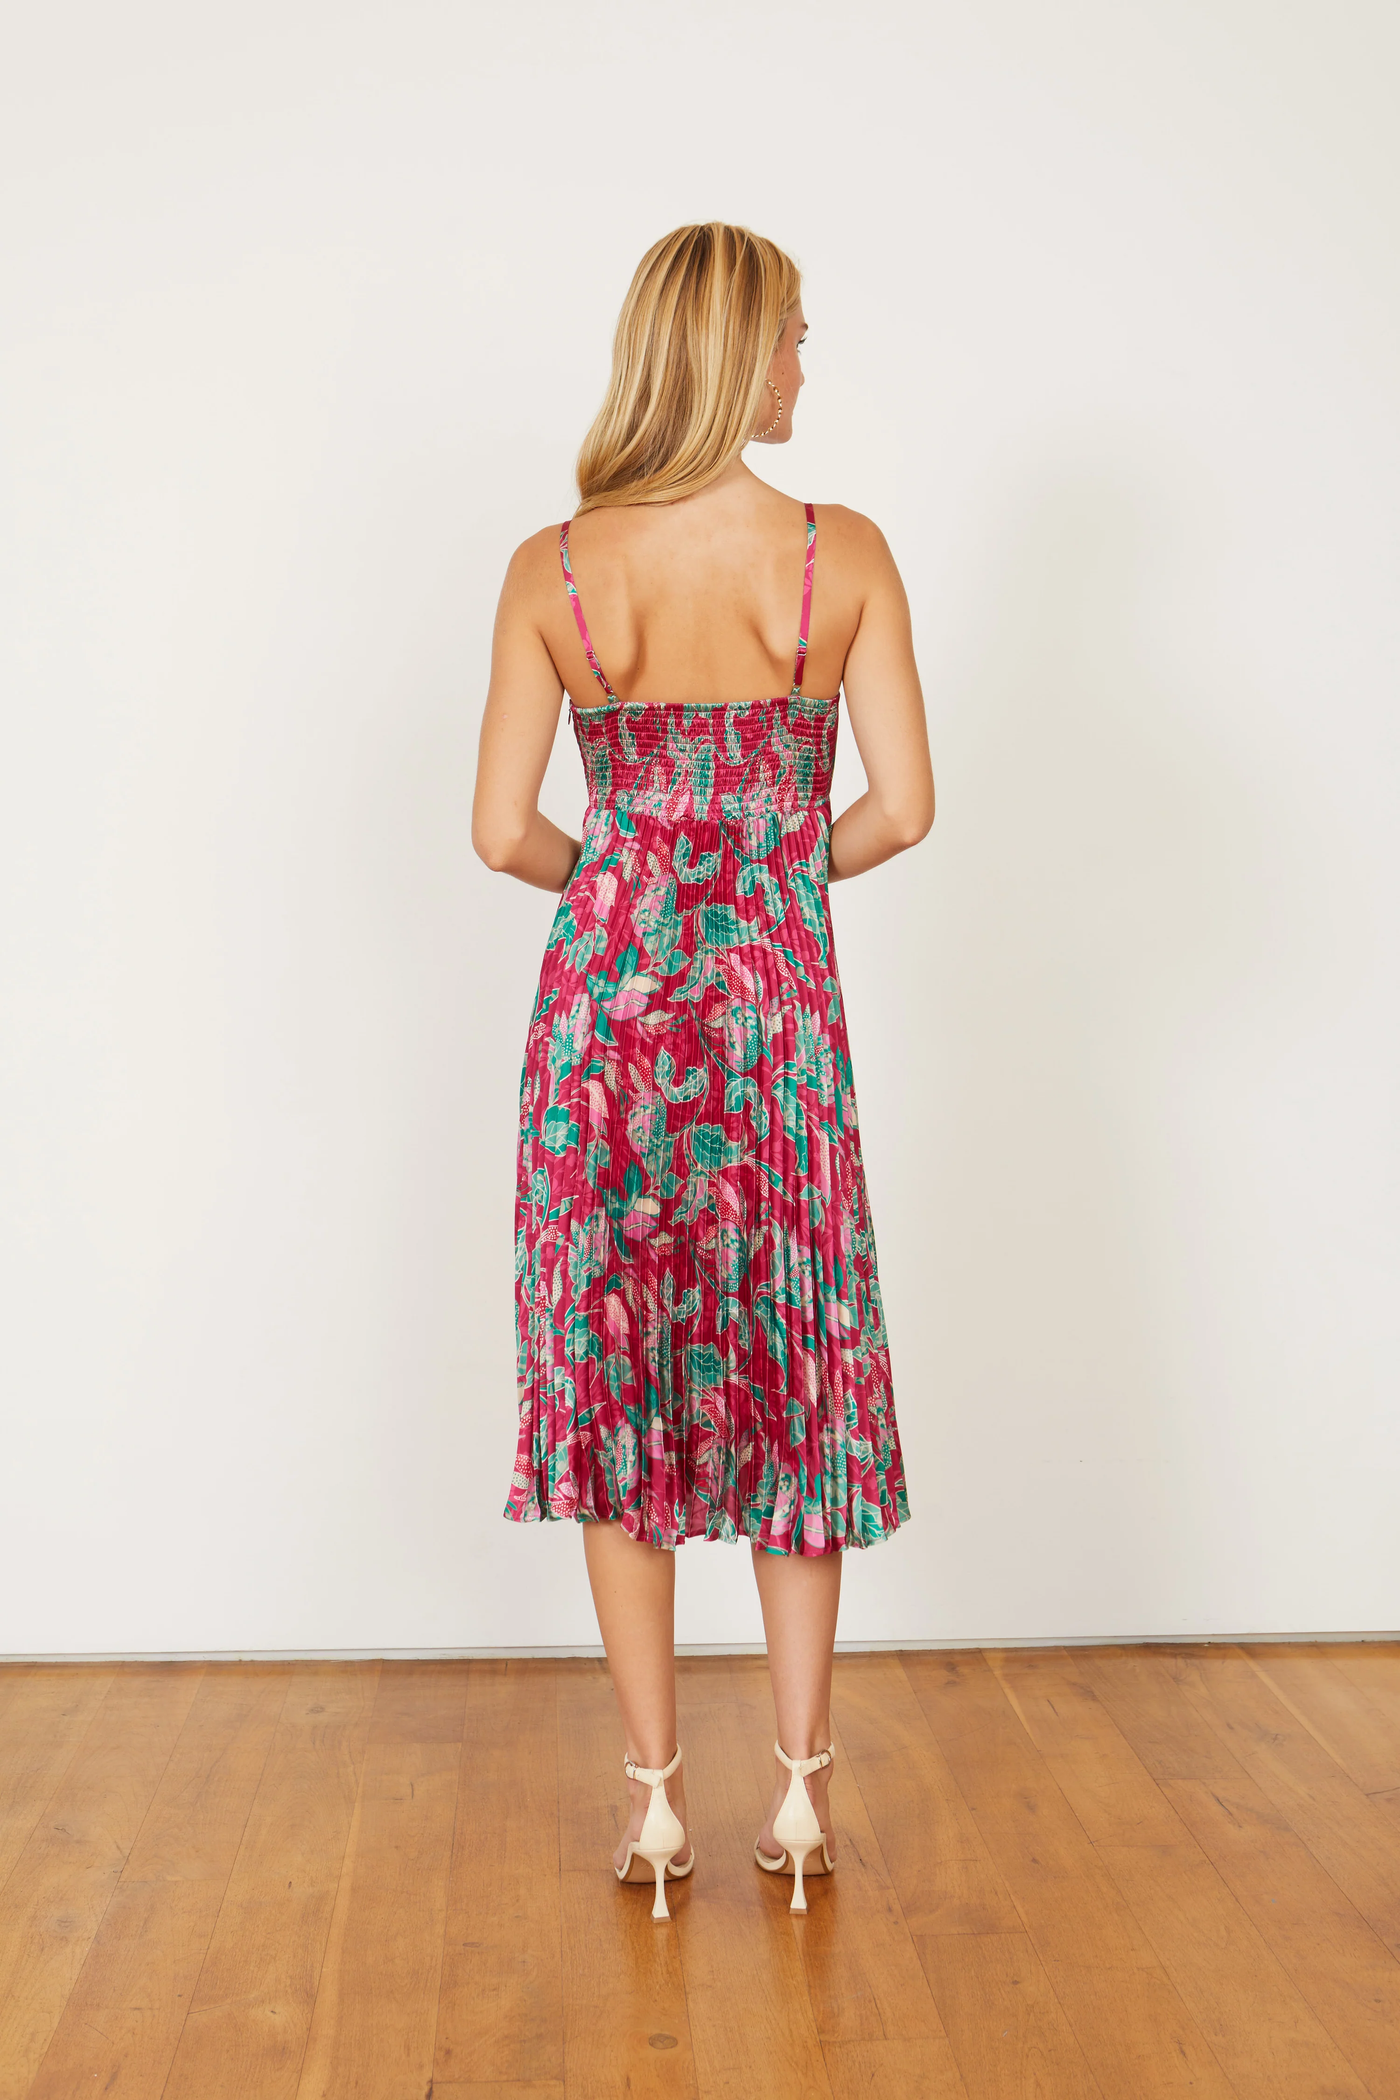 DONNA DRESS IN FLORAL RASPBERRY - Romi Boutique